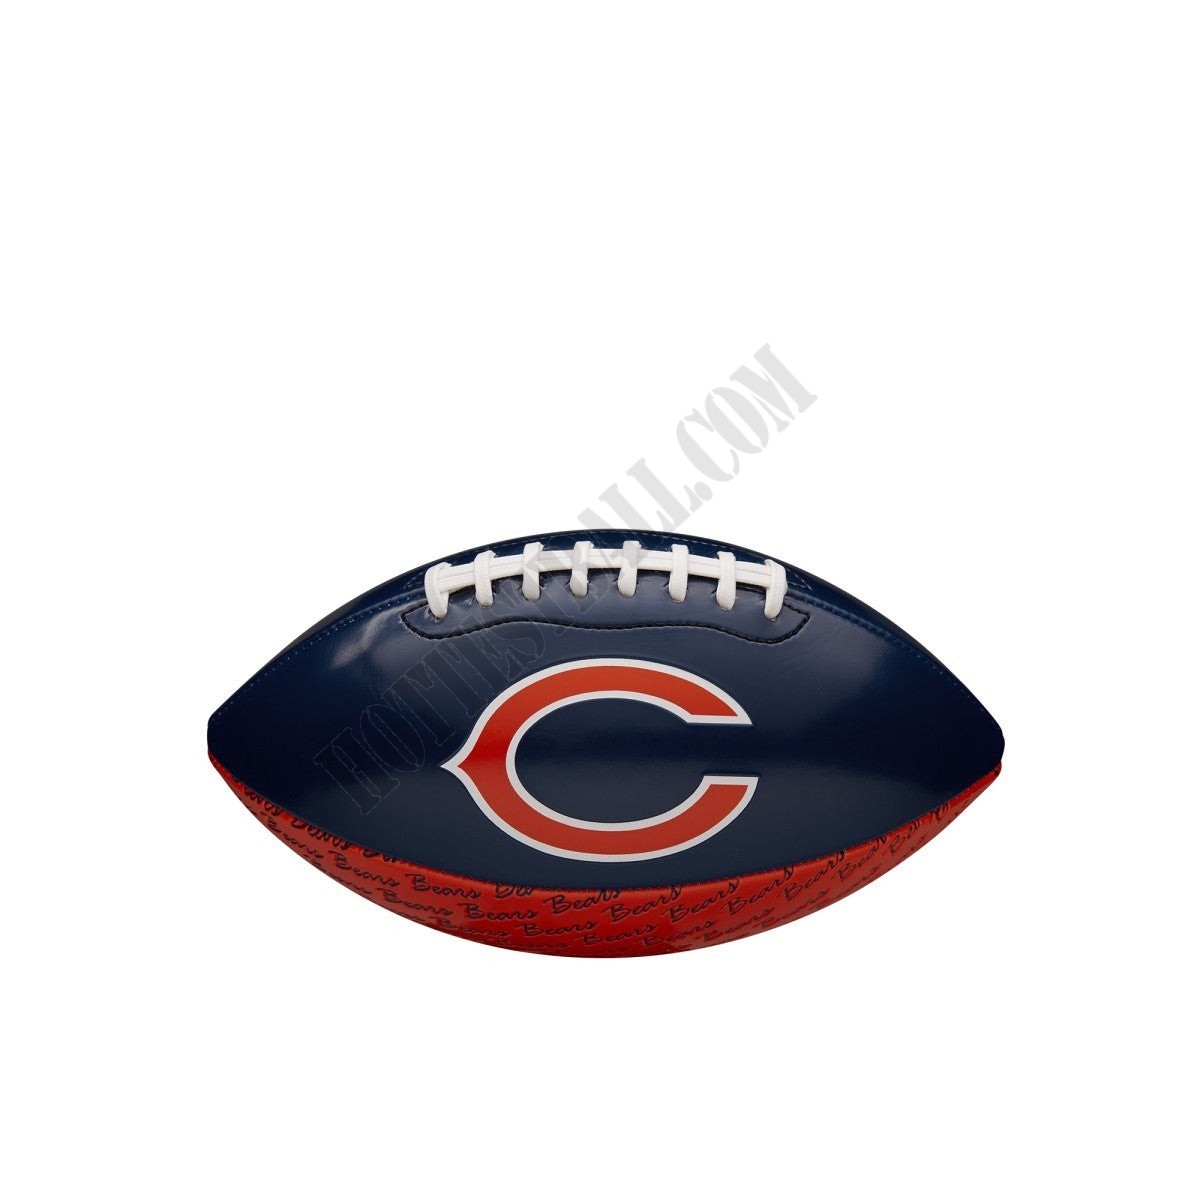 NFL City Pride Football - Chicago Bears ● Wilson Promotions - NFL City Pride Football - Chicago Bears ● Wilson Promotions